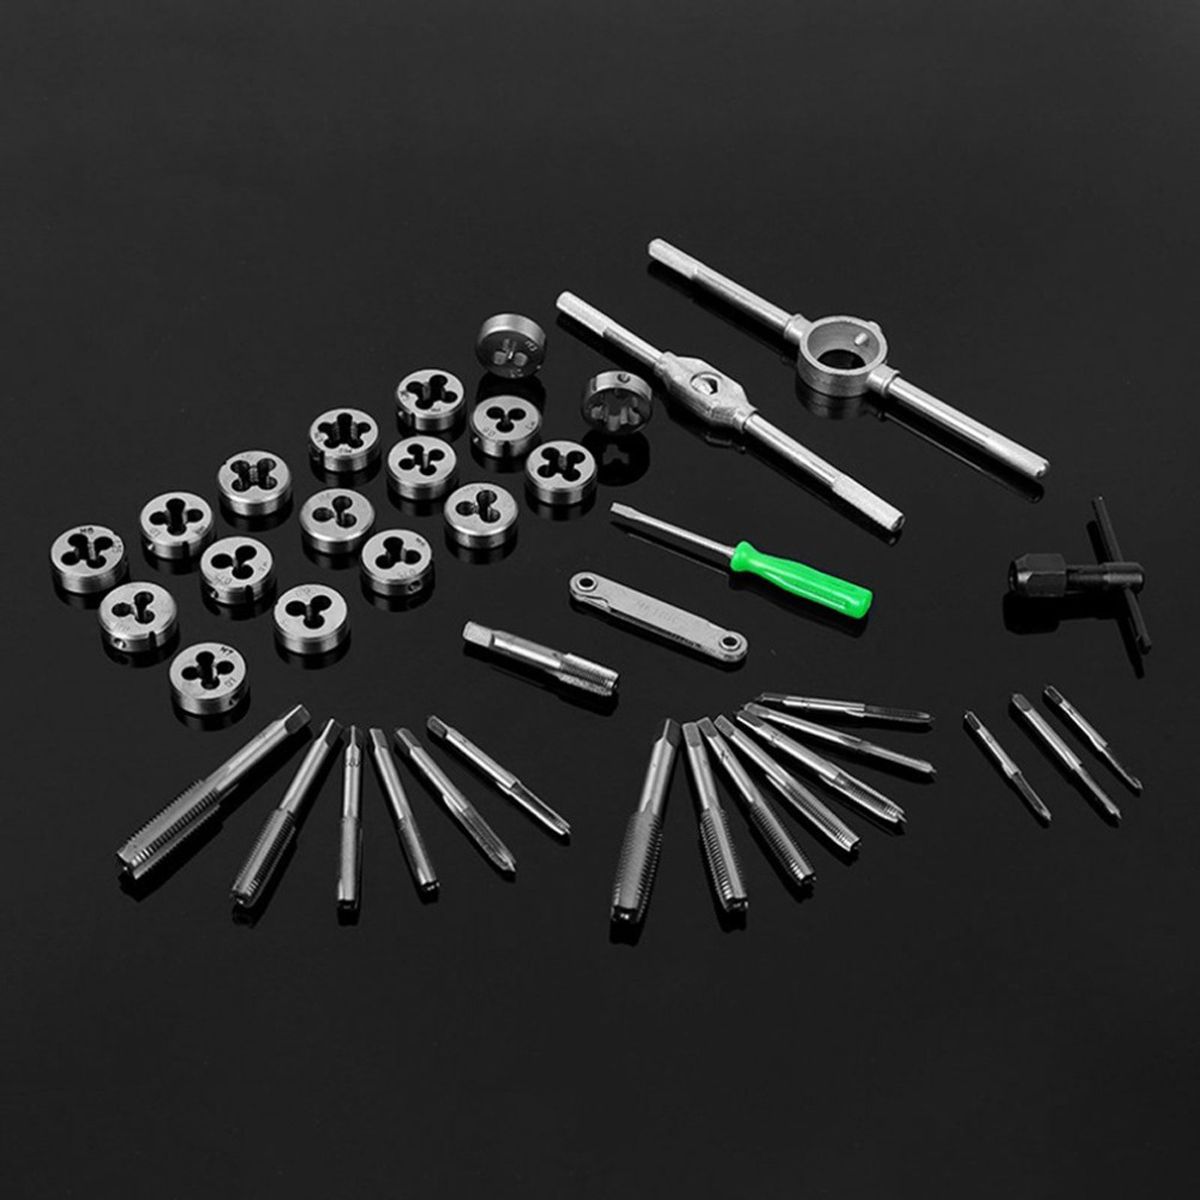 40Pcs-Metric-Tap-Wrench-and-Die-Pro-Set-M3-M12-Nut-Bolt-Alloy-Metal-Hand-Tools-1722491